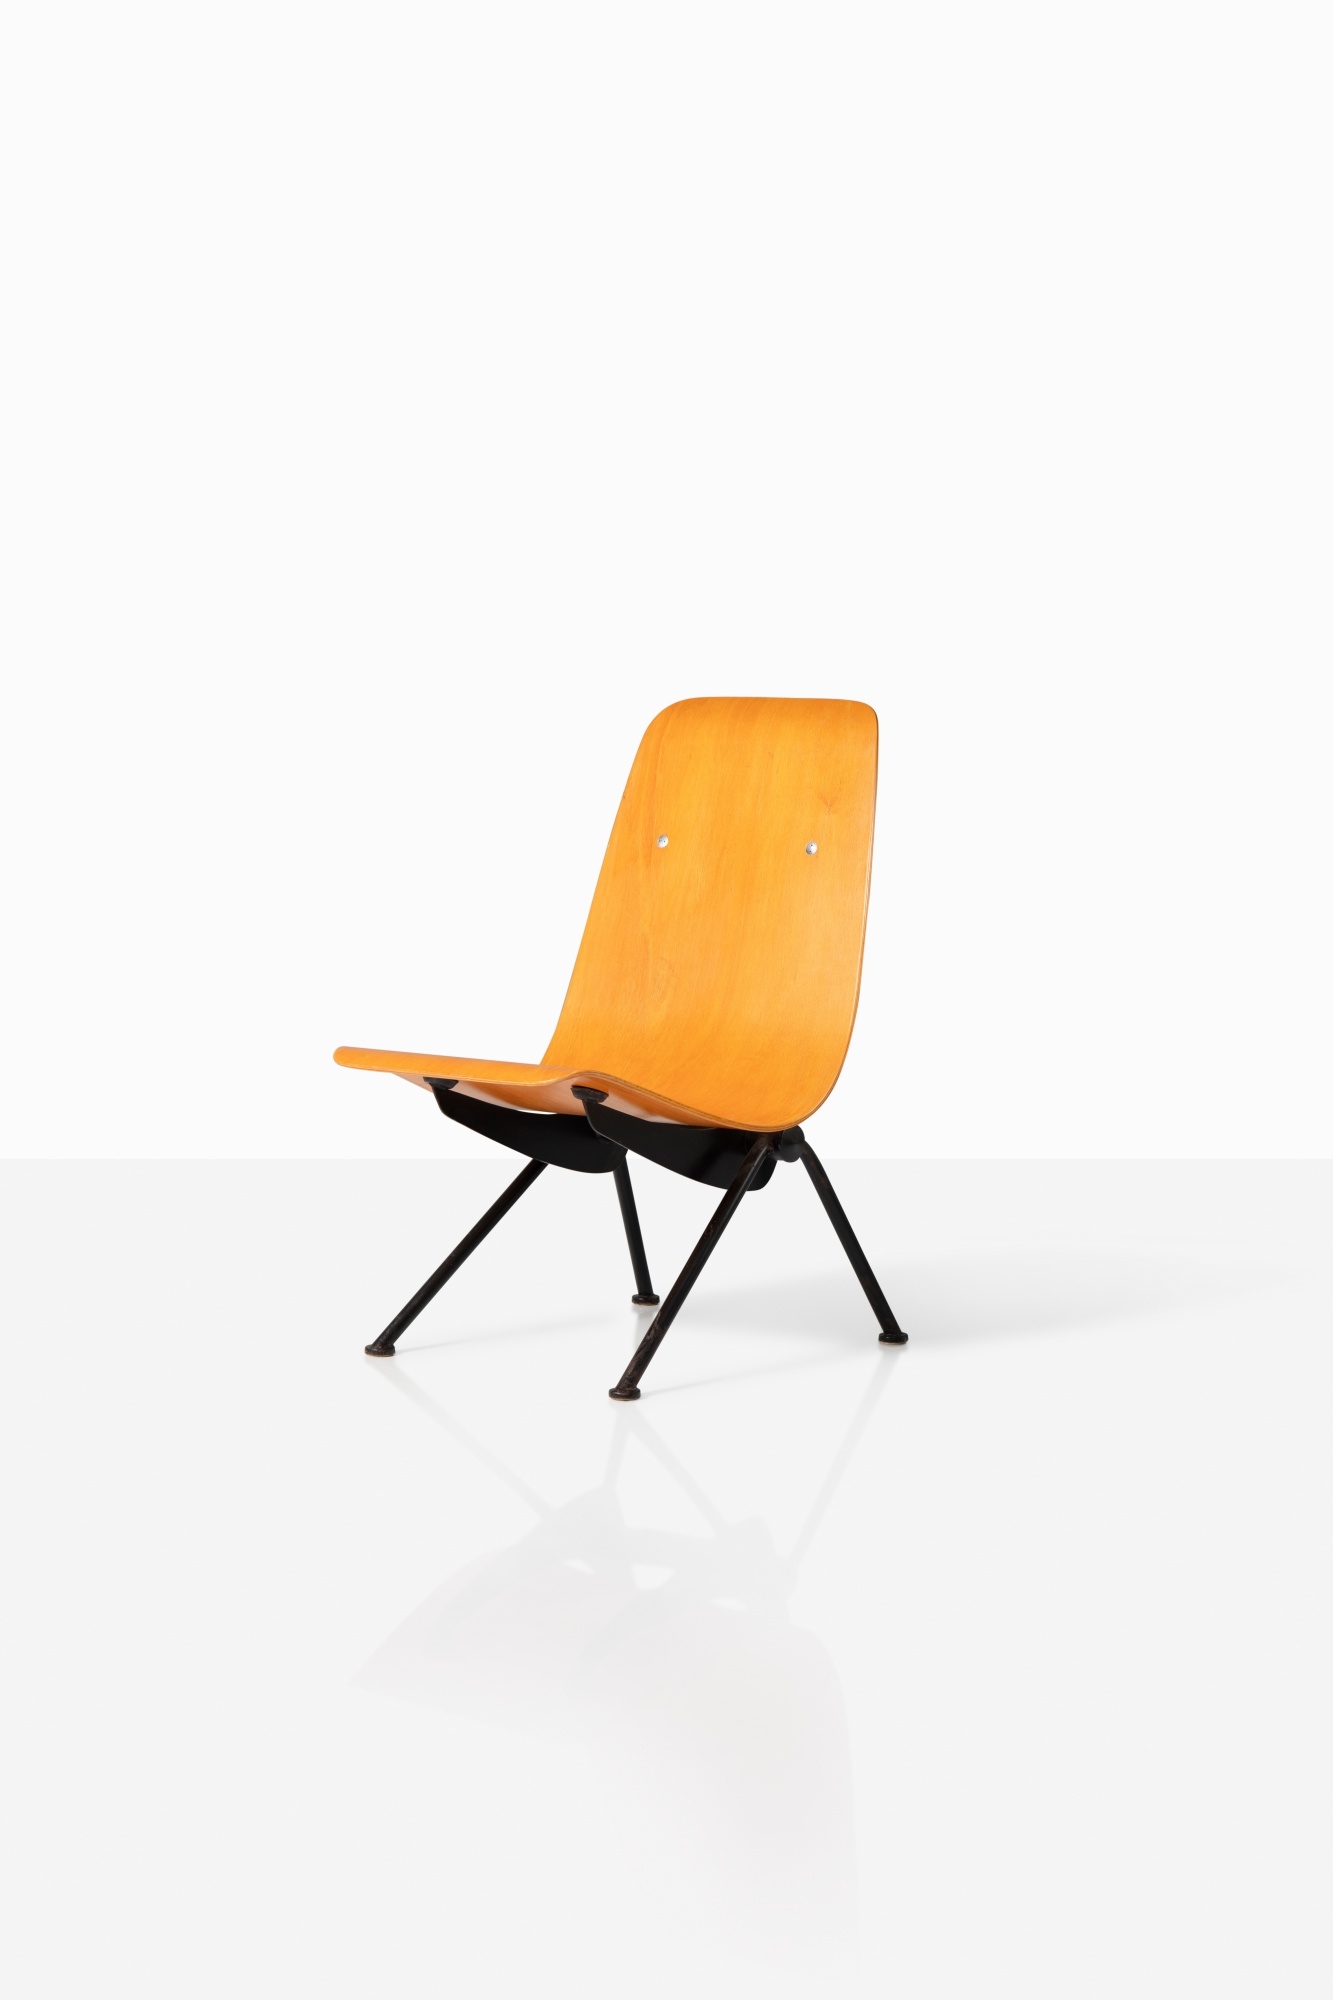 Artwork by Jean Prouvé, Fauteuil léger n°356, dit Antony, Made of lacquered steel